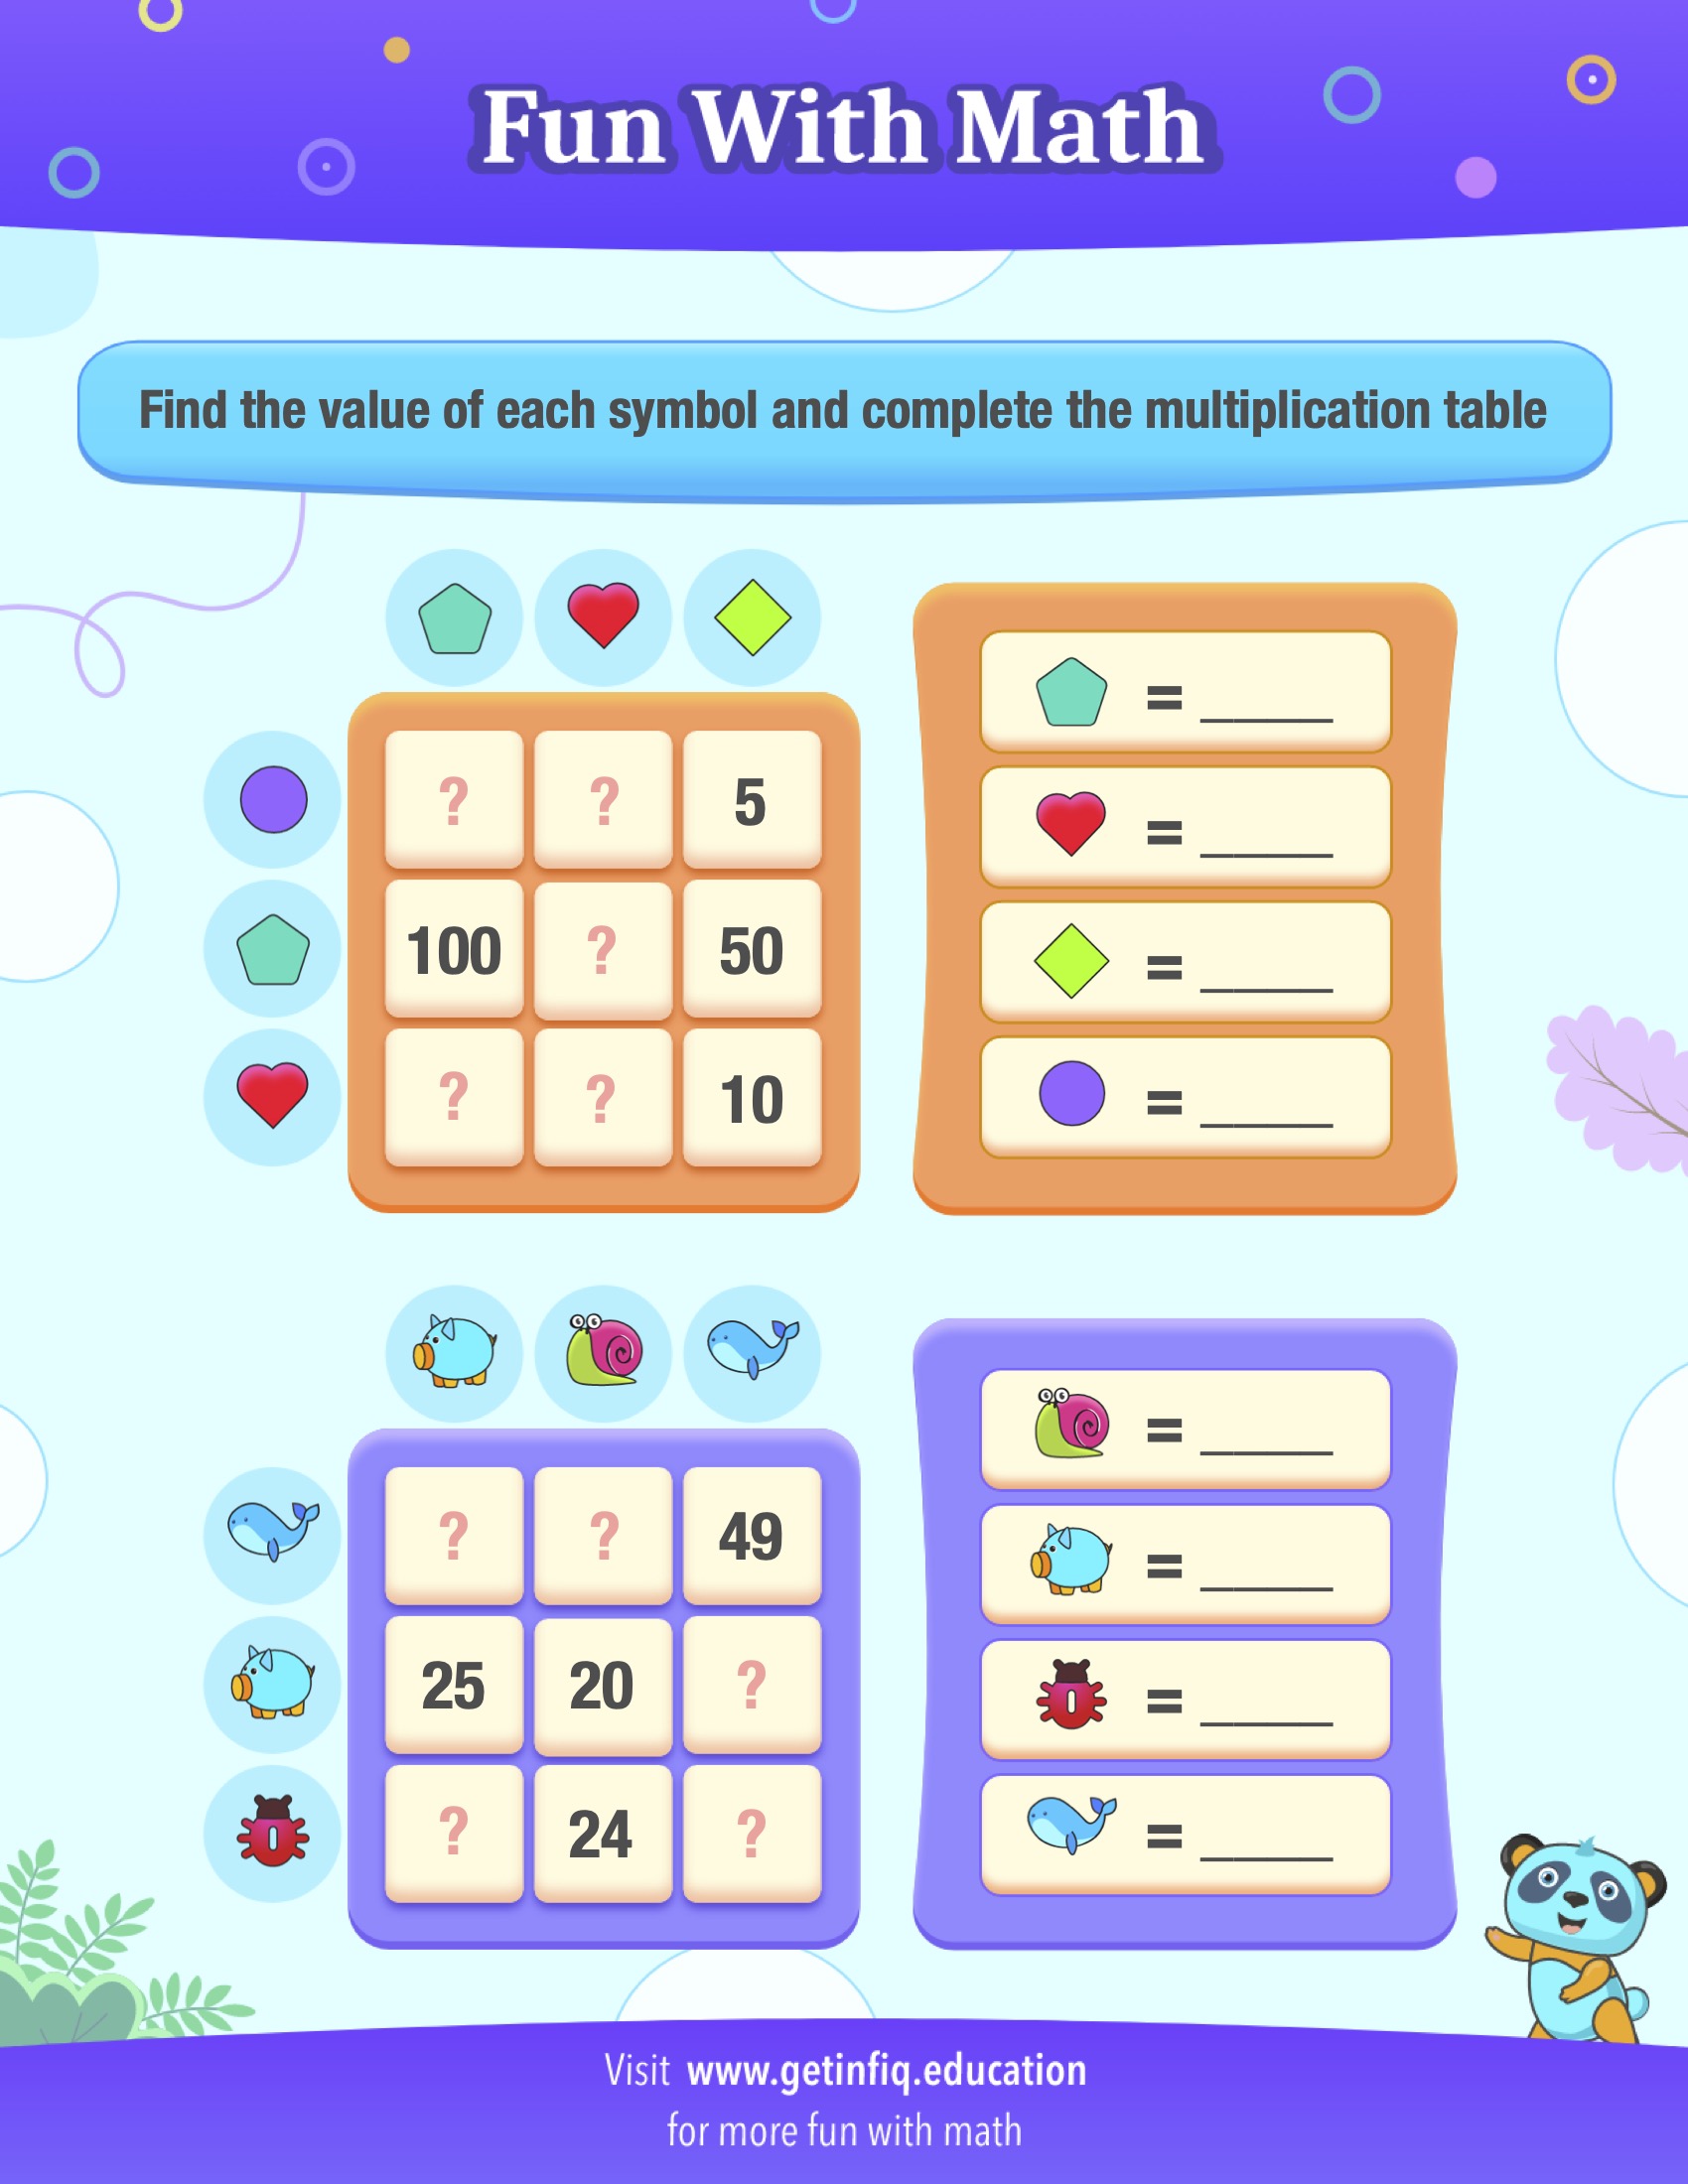 Grade 3 Multiplication Table Puzzle